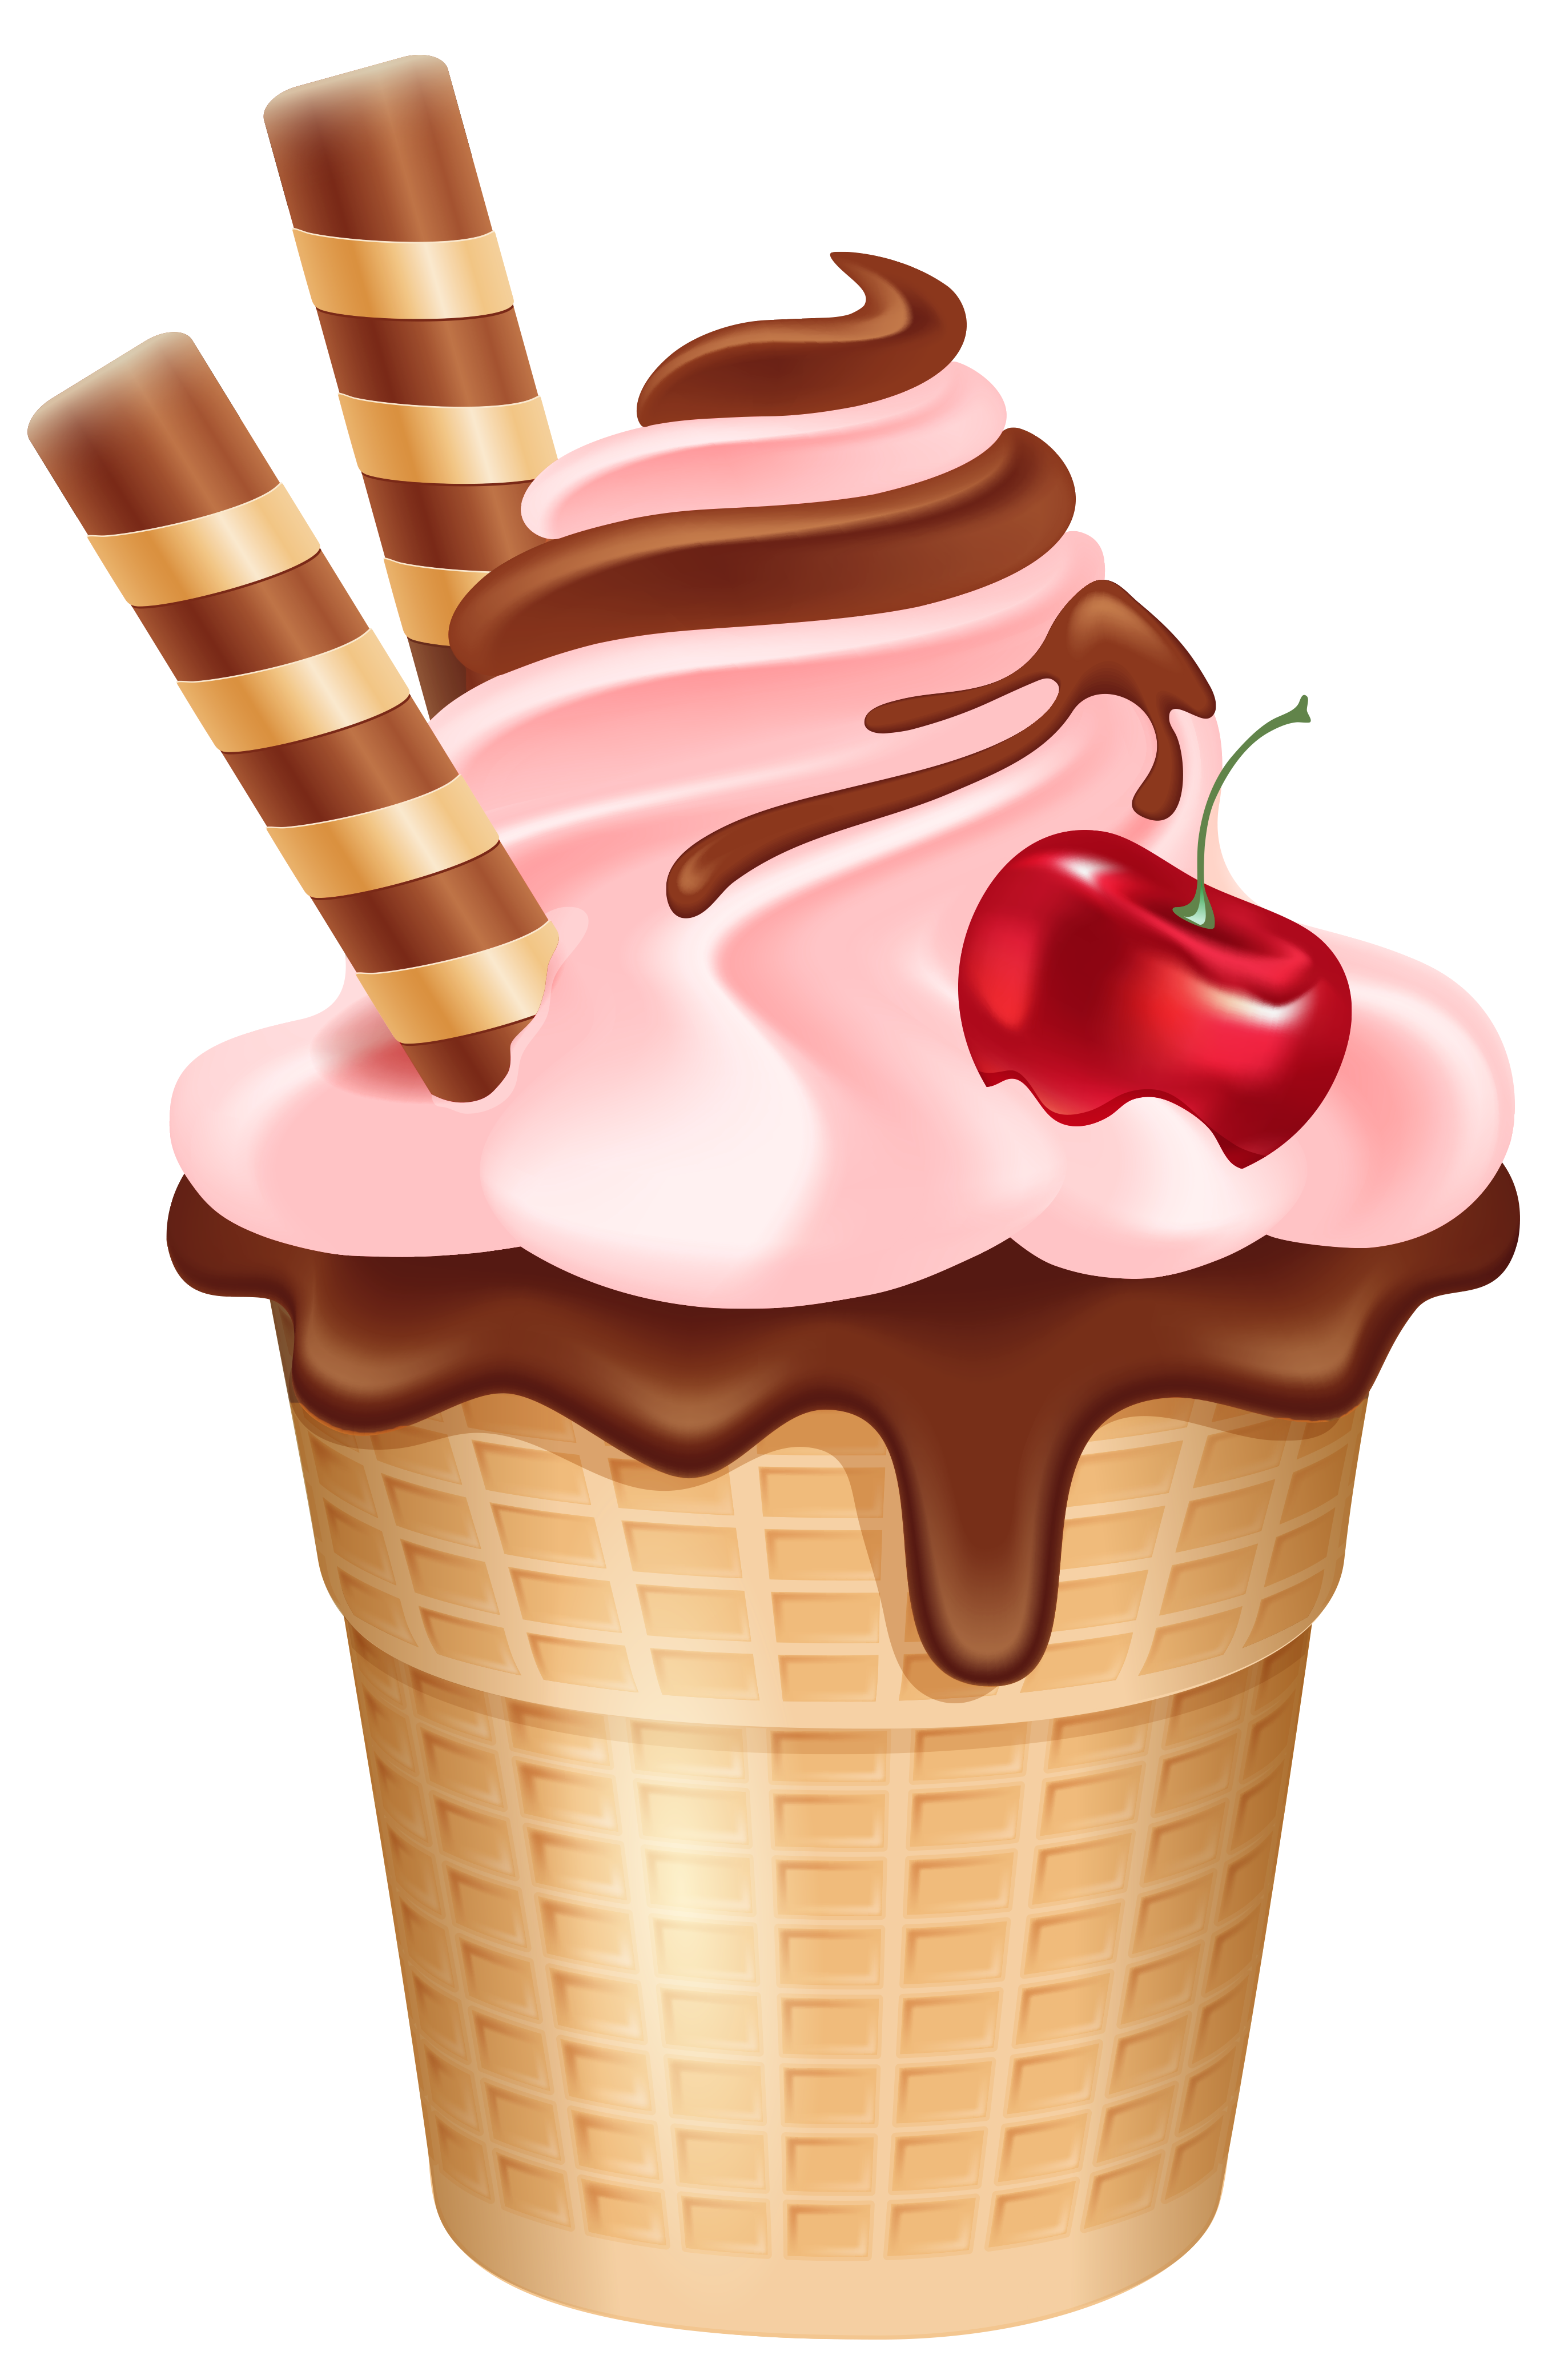 ice cream in a bowl clipart - photo #32